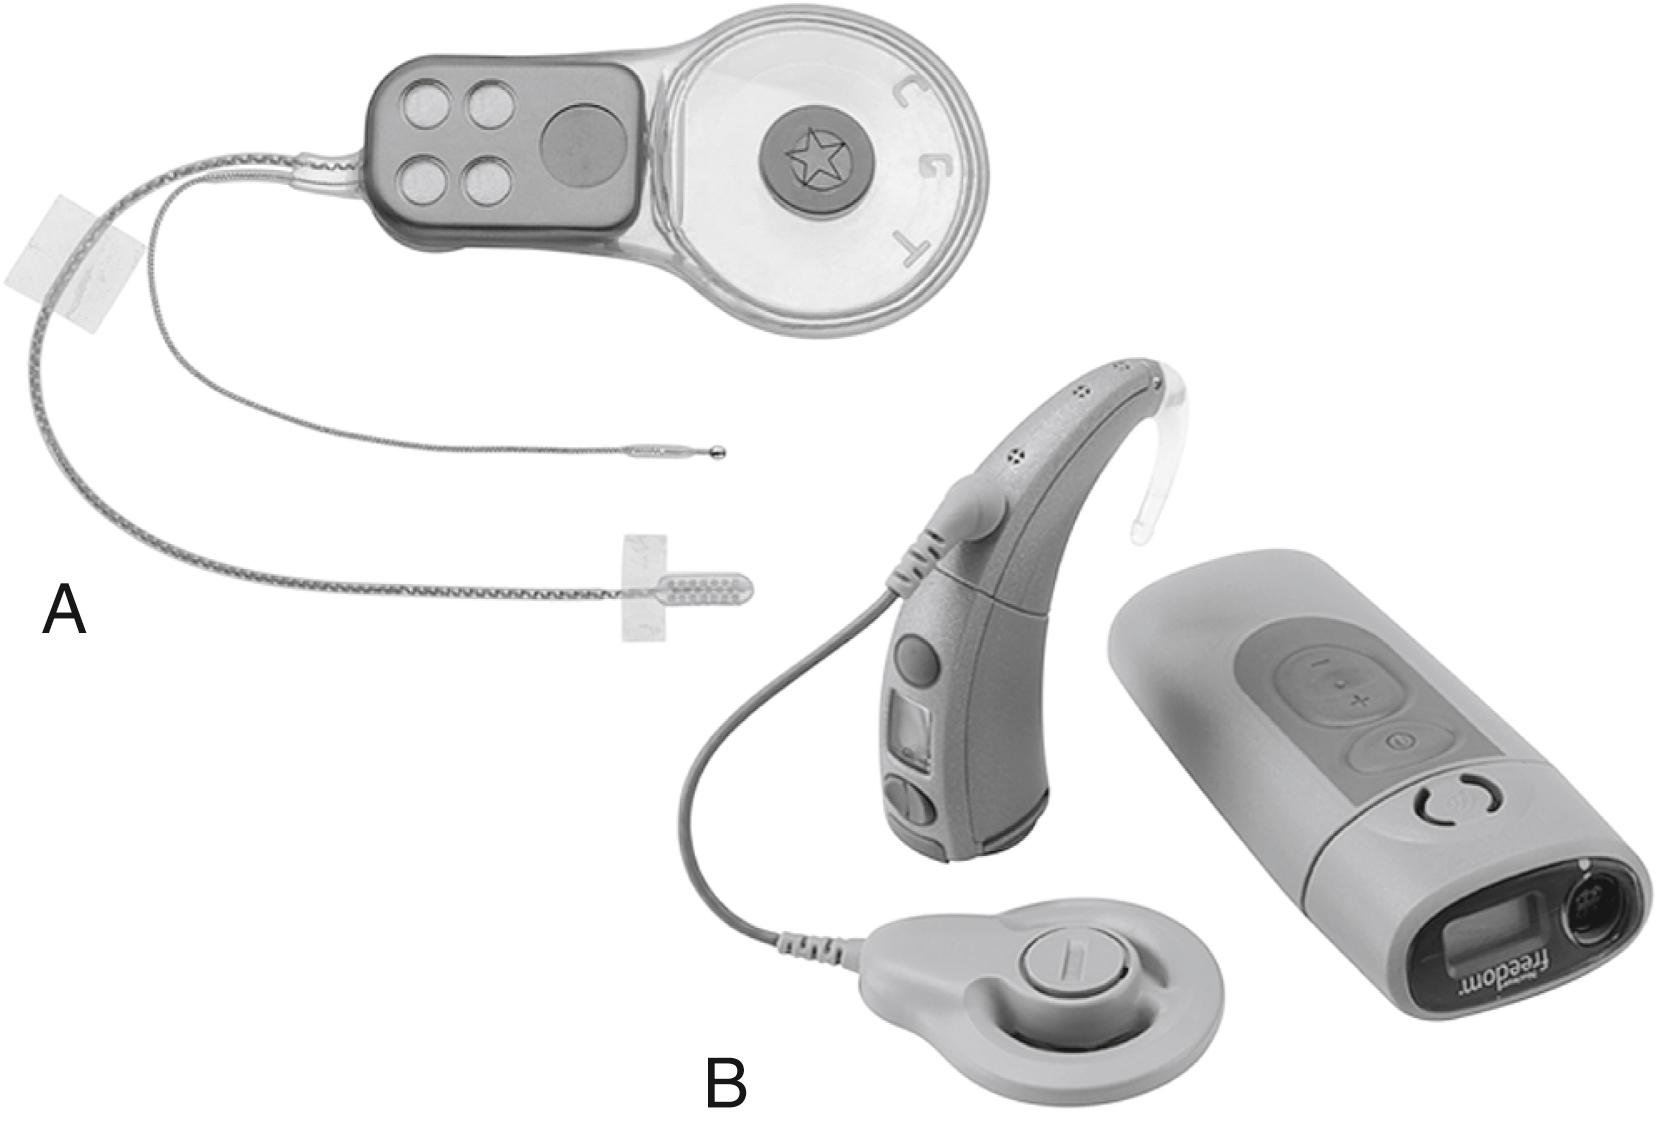 Fig. 53.1, (A) Auditory brainstem implant receiver and stimulator with 21-electrode array and remote ball ground electrode. (B) Freedom auditory brainstem implant processor with ear-level controller, transmitter coil, and the body-worn controller for longer battery life.